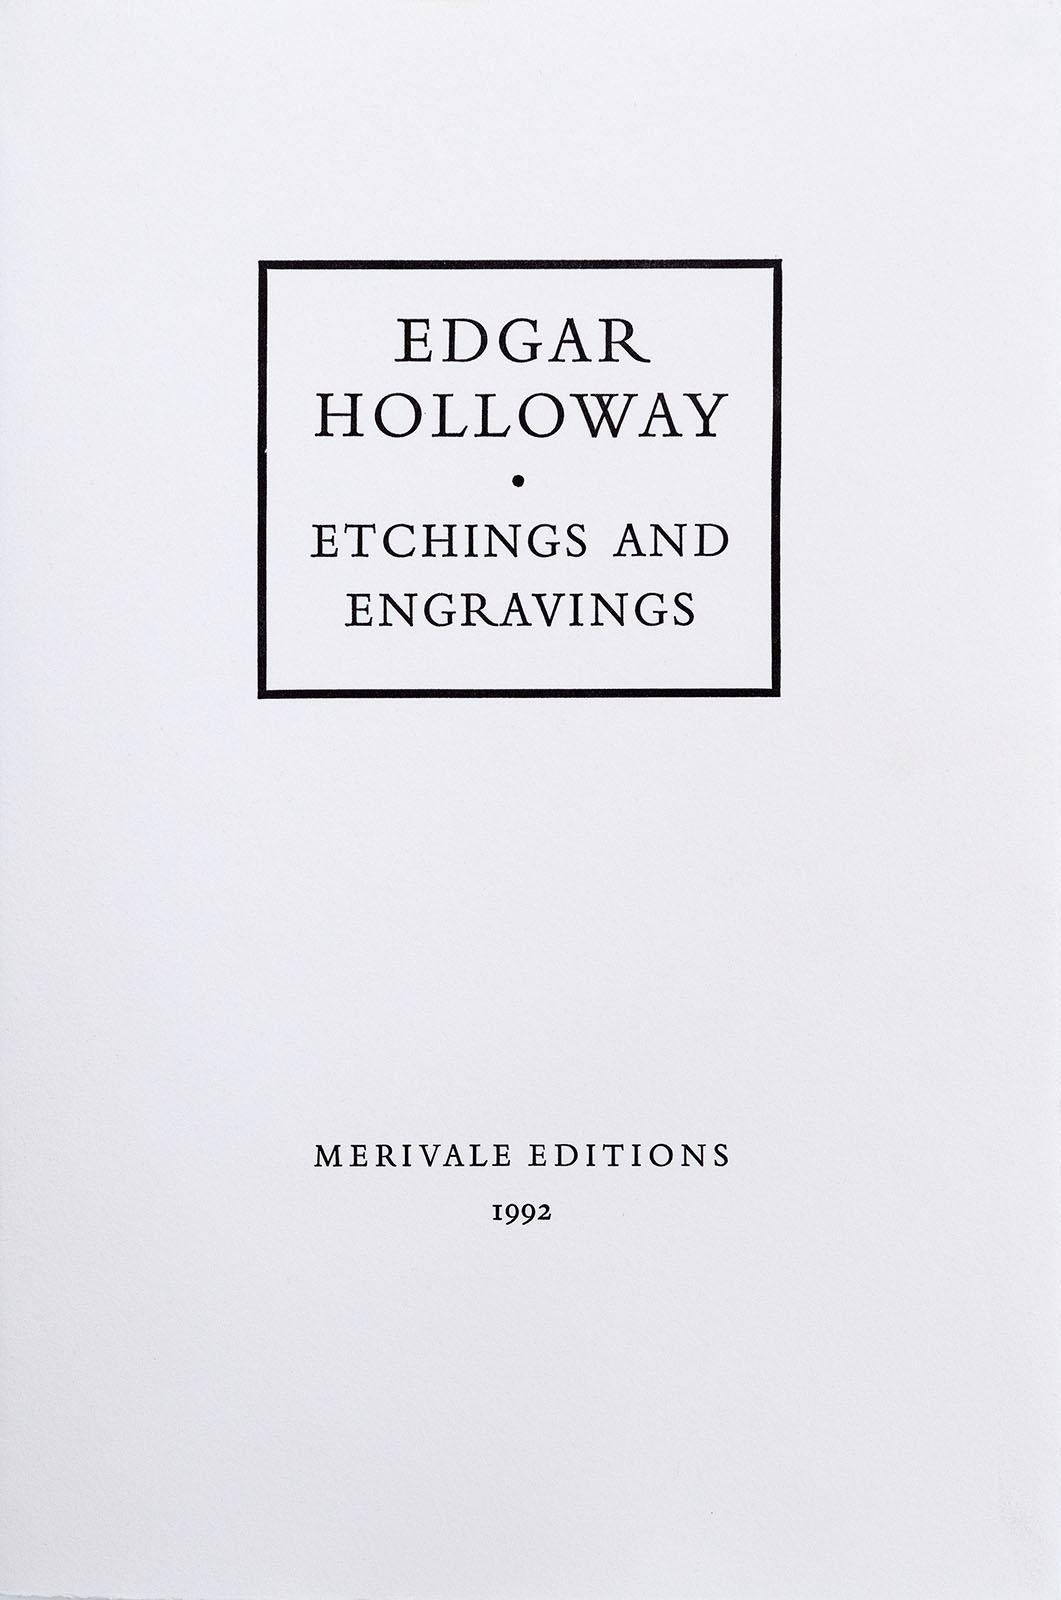 Folio of 6 etchings and engravings - Other Art Style Print by Edgar A. Holloway